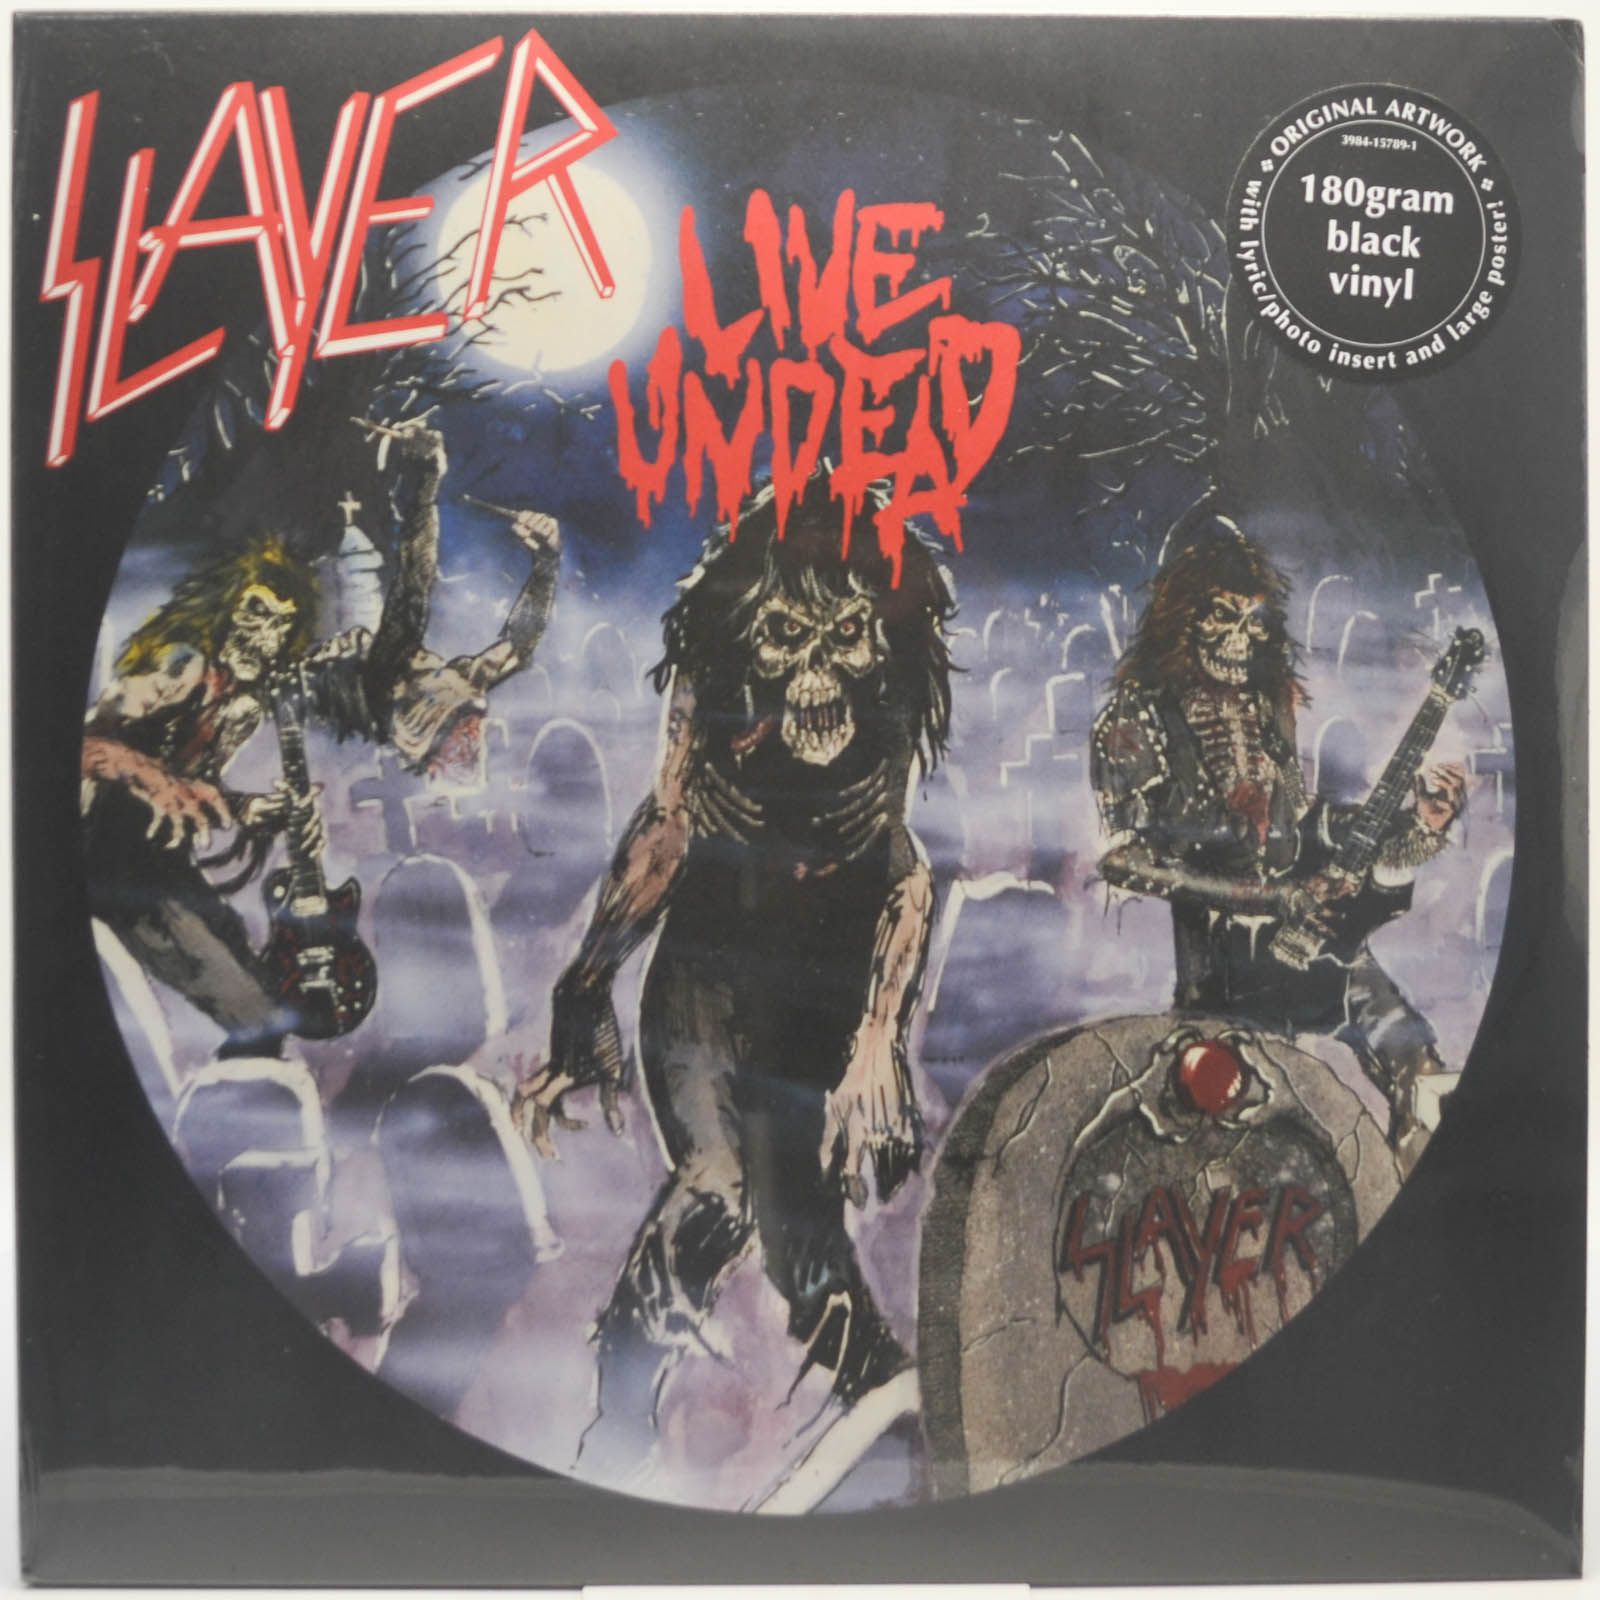 Slayer — Live Undead, 1985